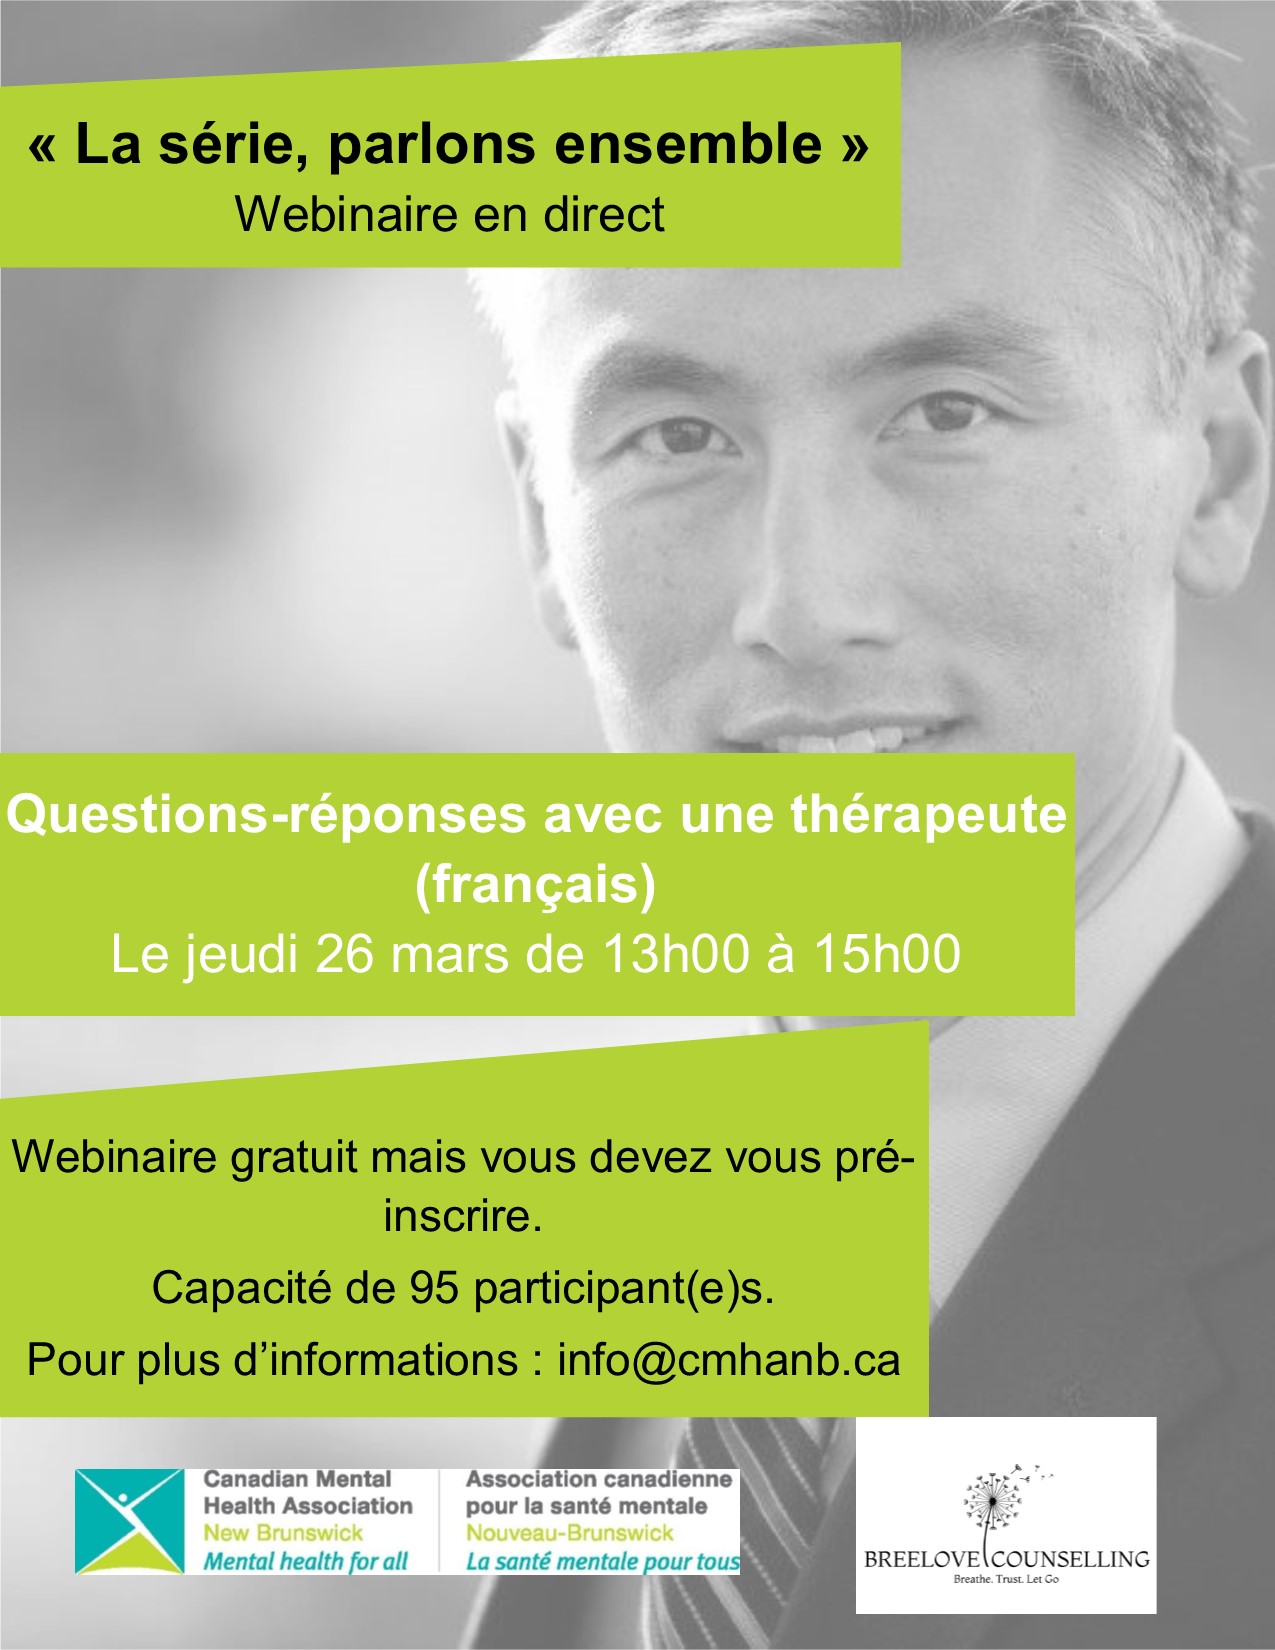 Q&A with a Therapist (French)